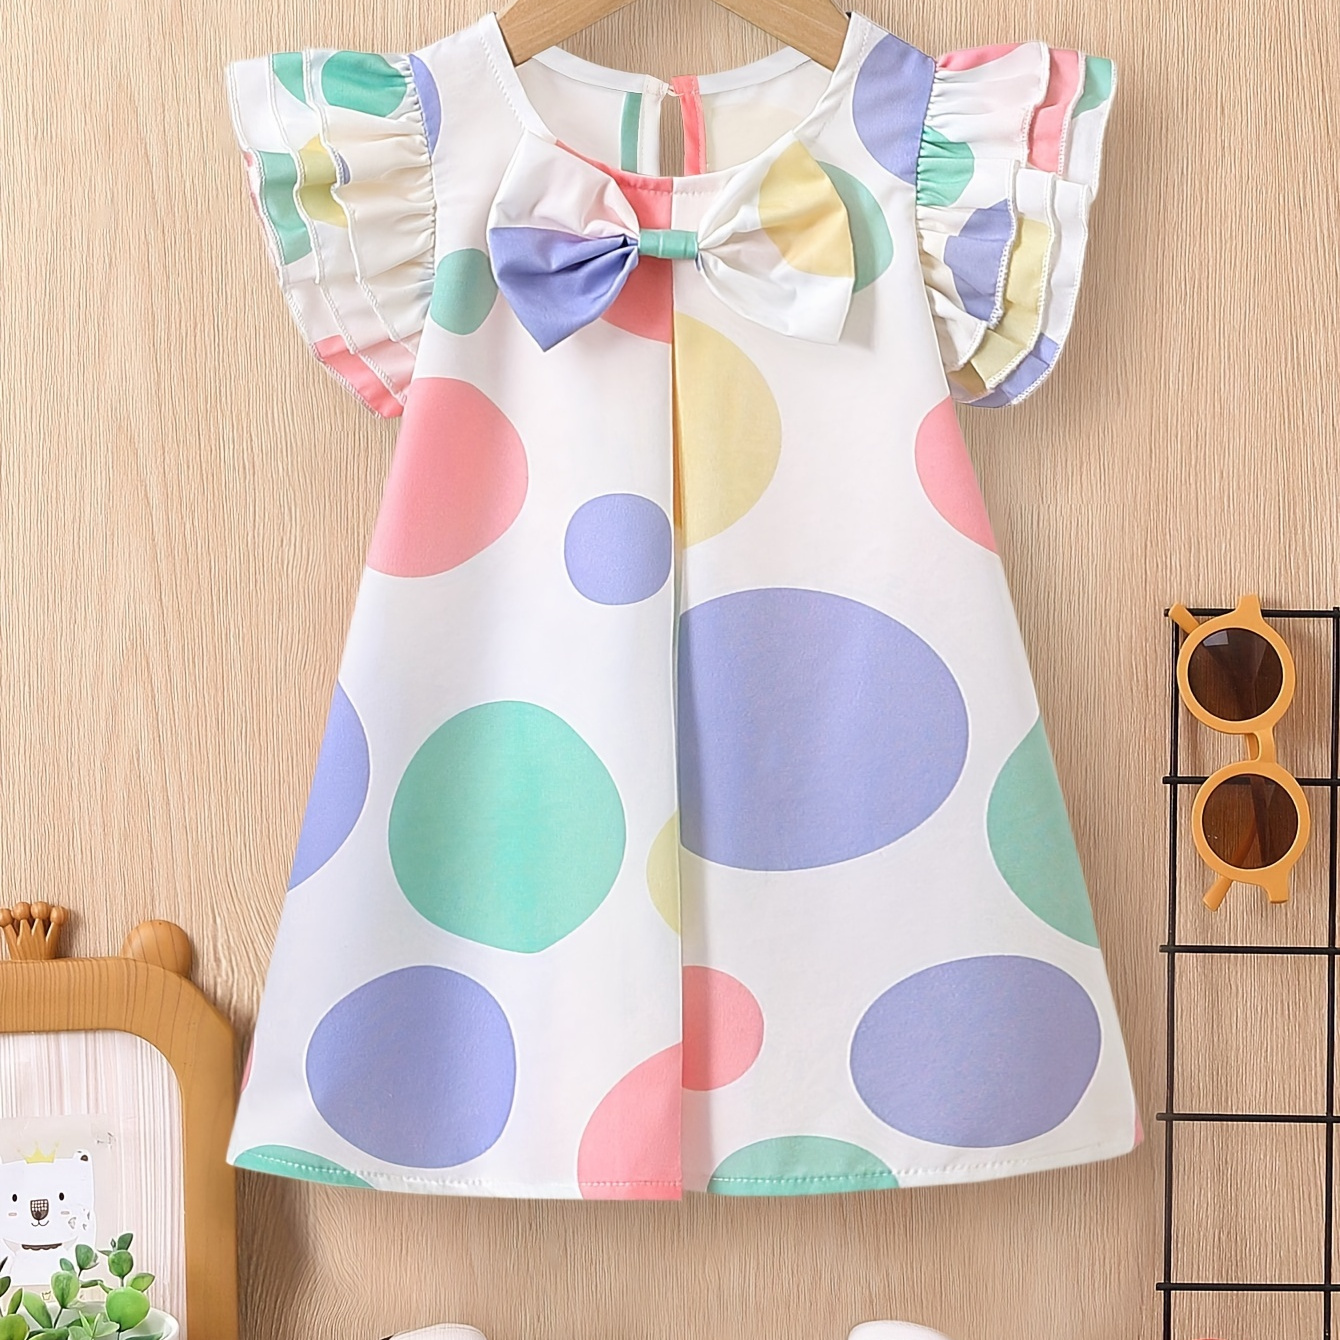 

Baby's Colorful Polka Dots Pattern Bowknot Decor Cap Sleeve Dress, Infant & Toddler Girl's Clothing For Summer/spring, As Gift